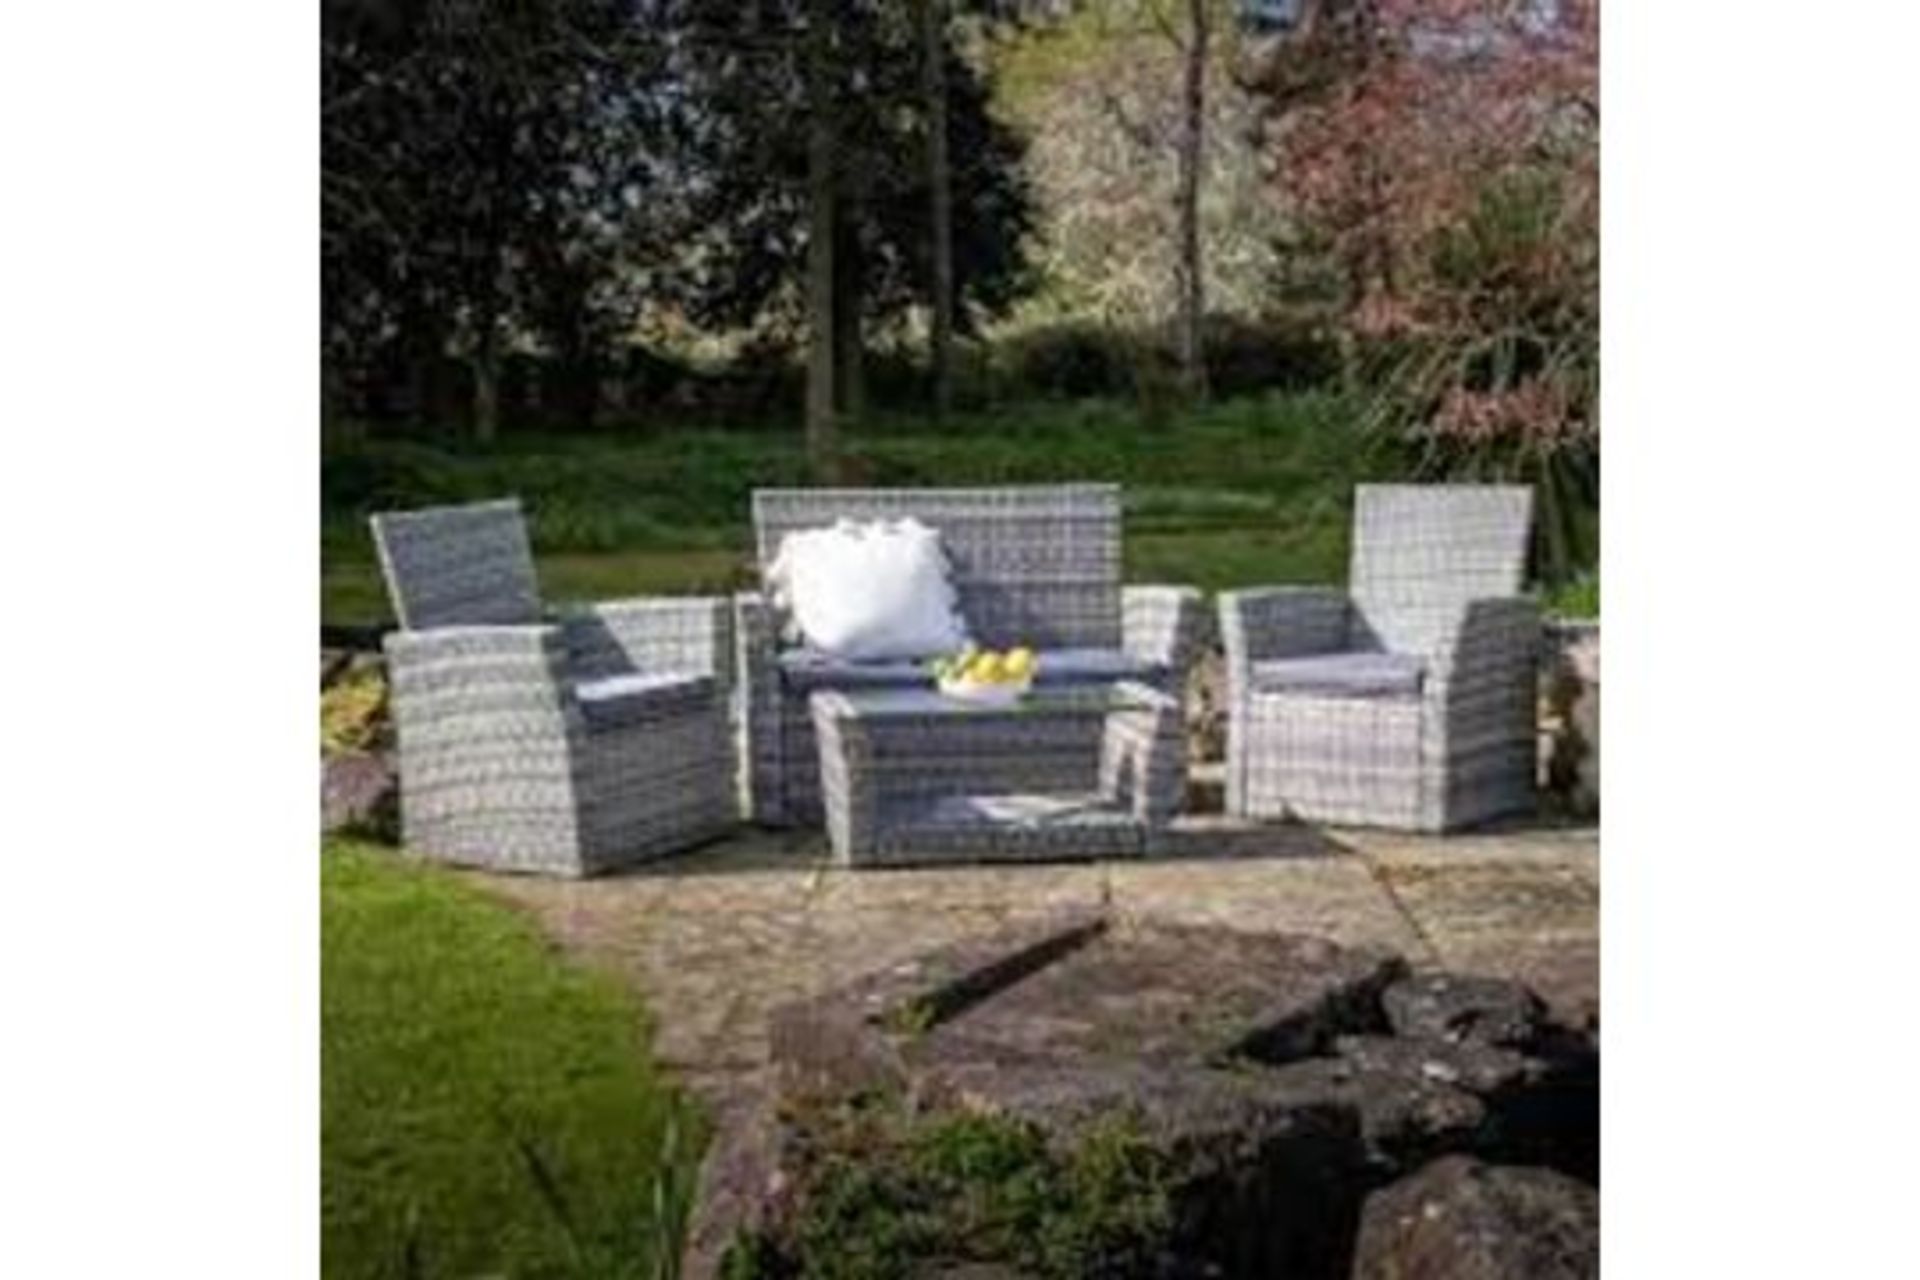 New Boxed Corfo 4 Seater Garden Furniture Set in Grey. The 4-piece garden furniture set includes a - Image 2 of 2